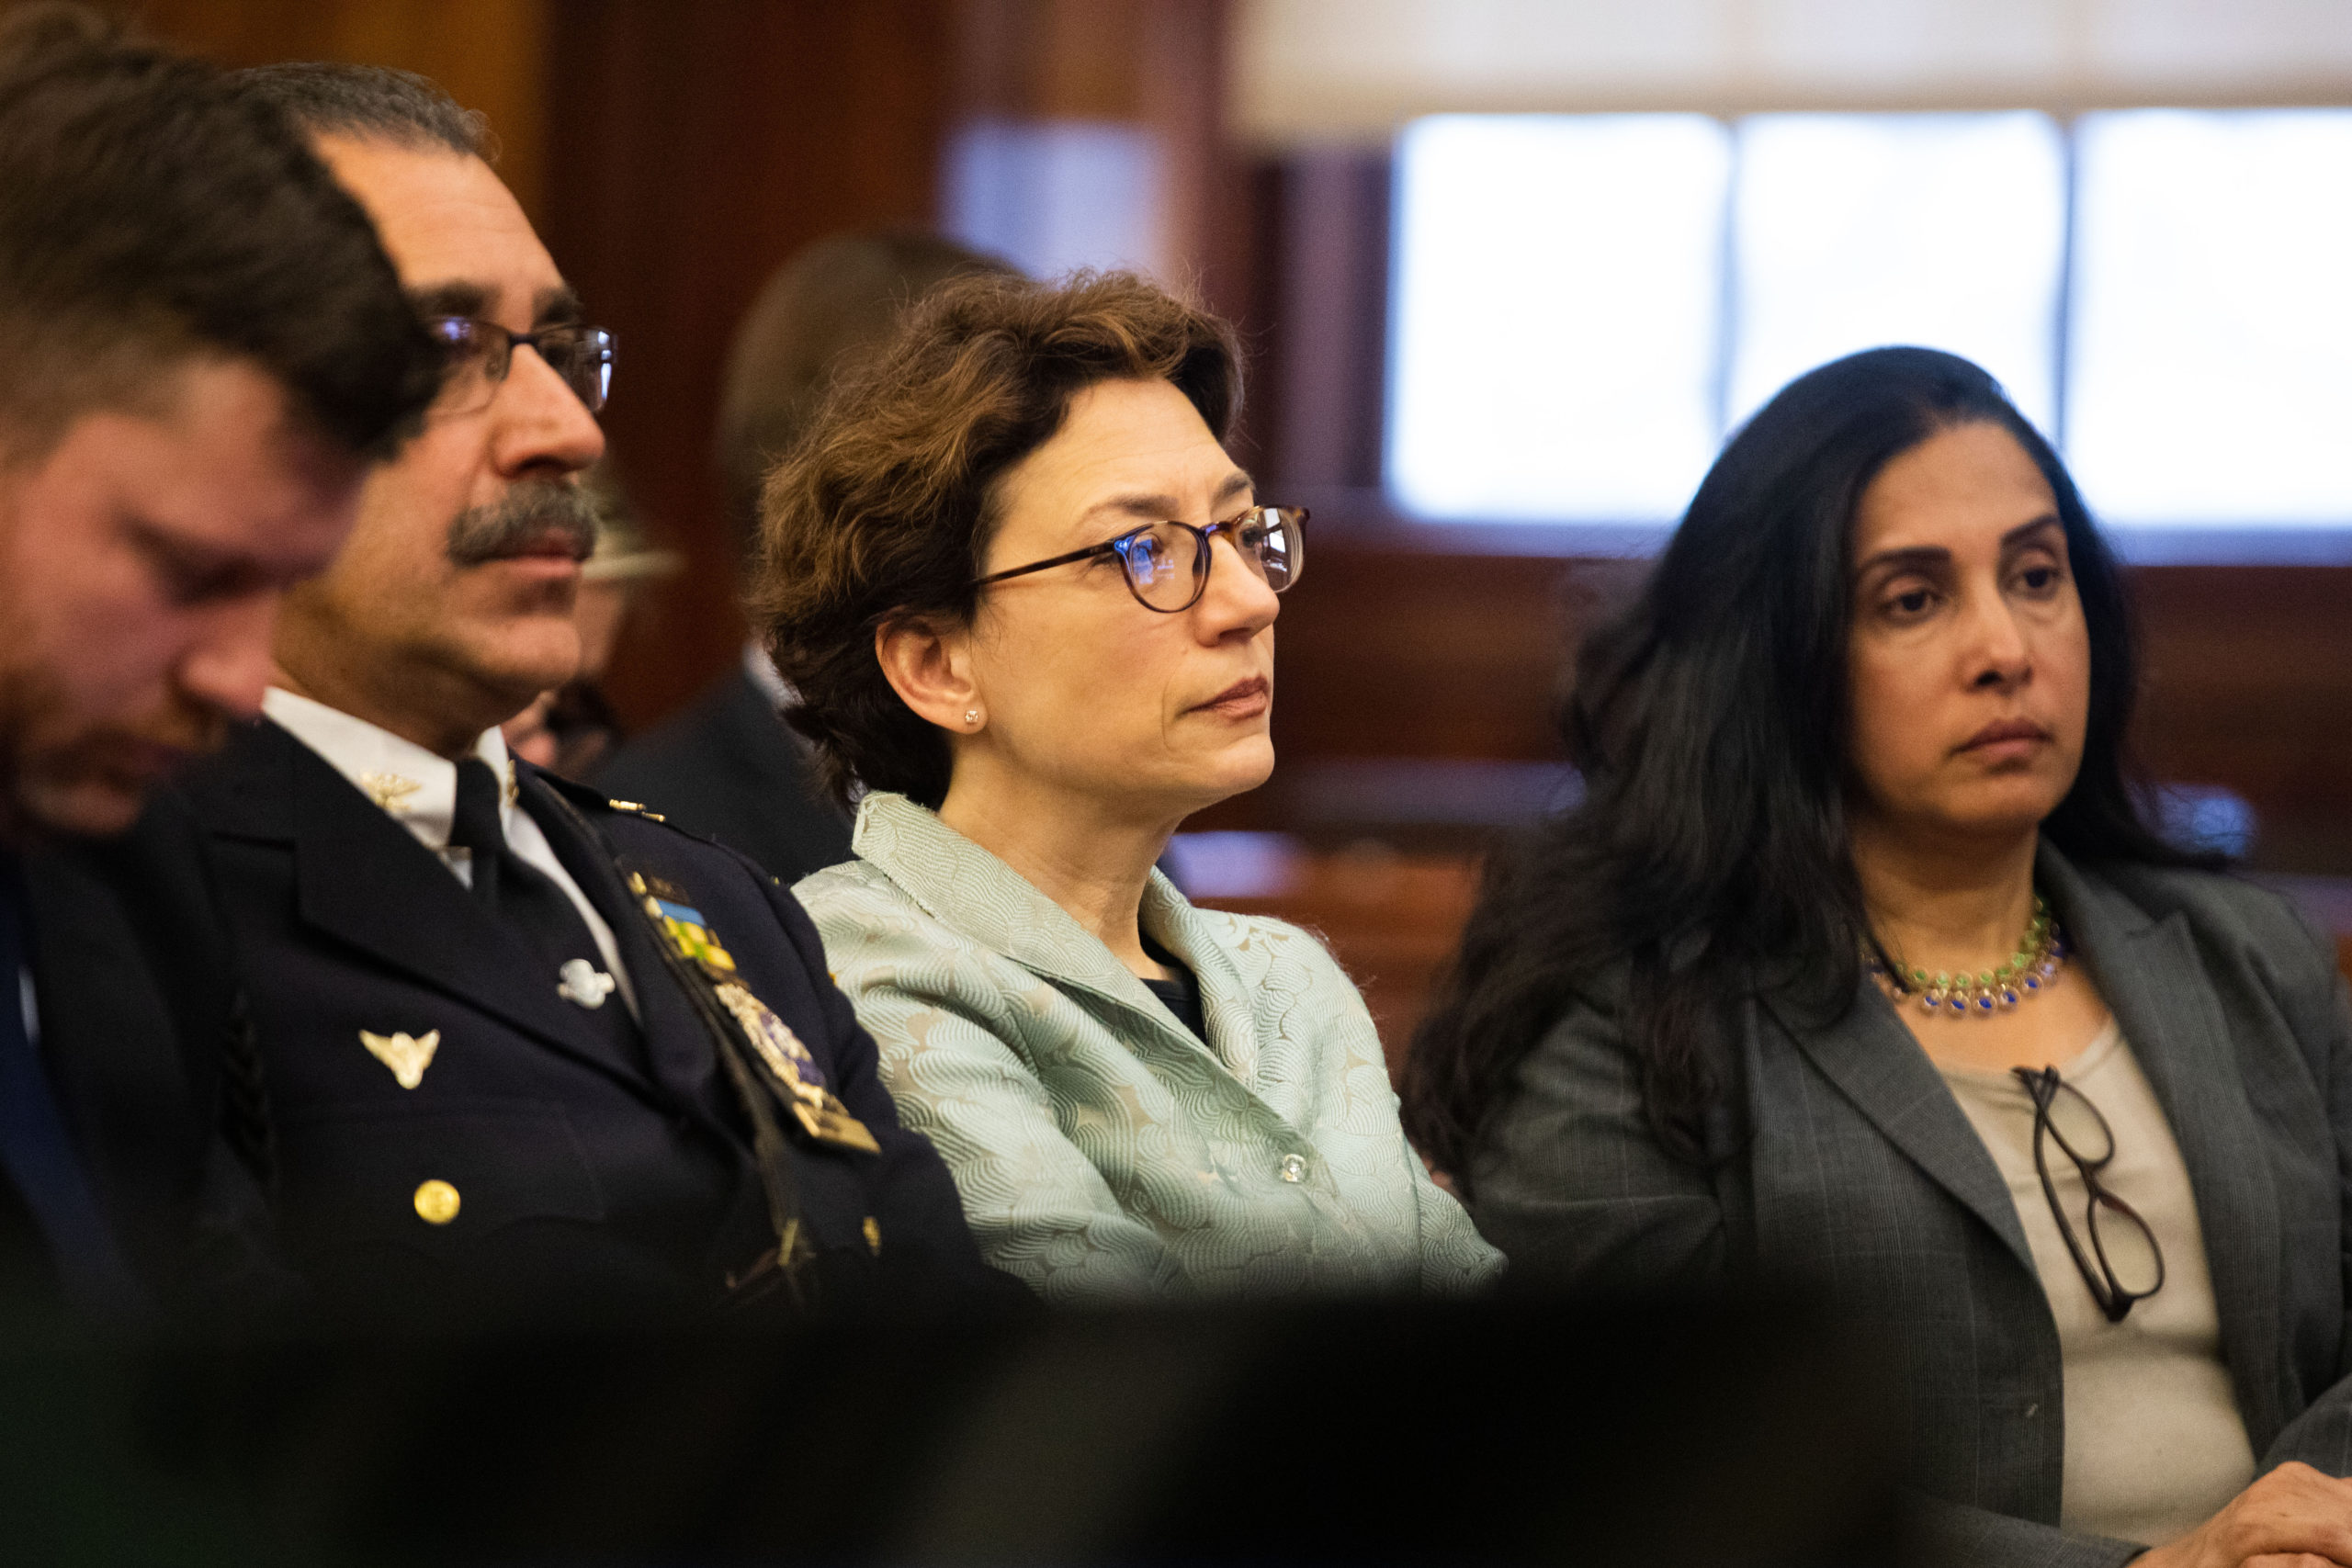 NYC Department of Transportation Commissioner Polly Trottenberg sits in the crowd during a City Council hearing to discuss the future of the Brooklyn-Queens Expressway on Feb. 25, 2020. The aging highway was thrust into controversy in September 2018 when DOT backed replacing the Brooklyn Heights Promenade with a six-lane highway to speed up the expressway repairs. Photo: Paul Frangipane/Brooklyn Eagle